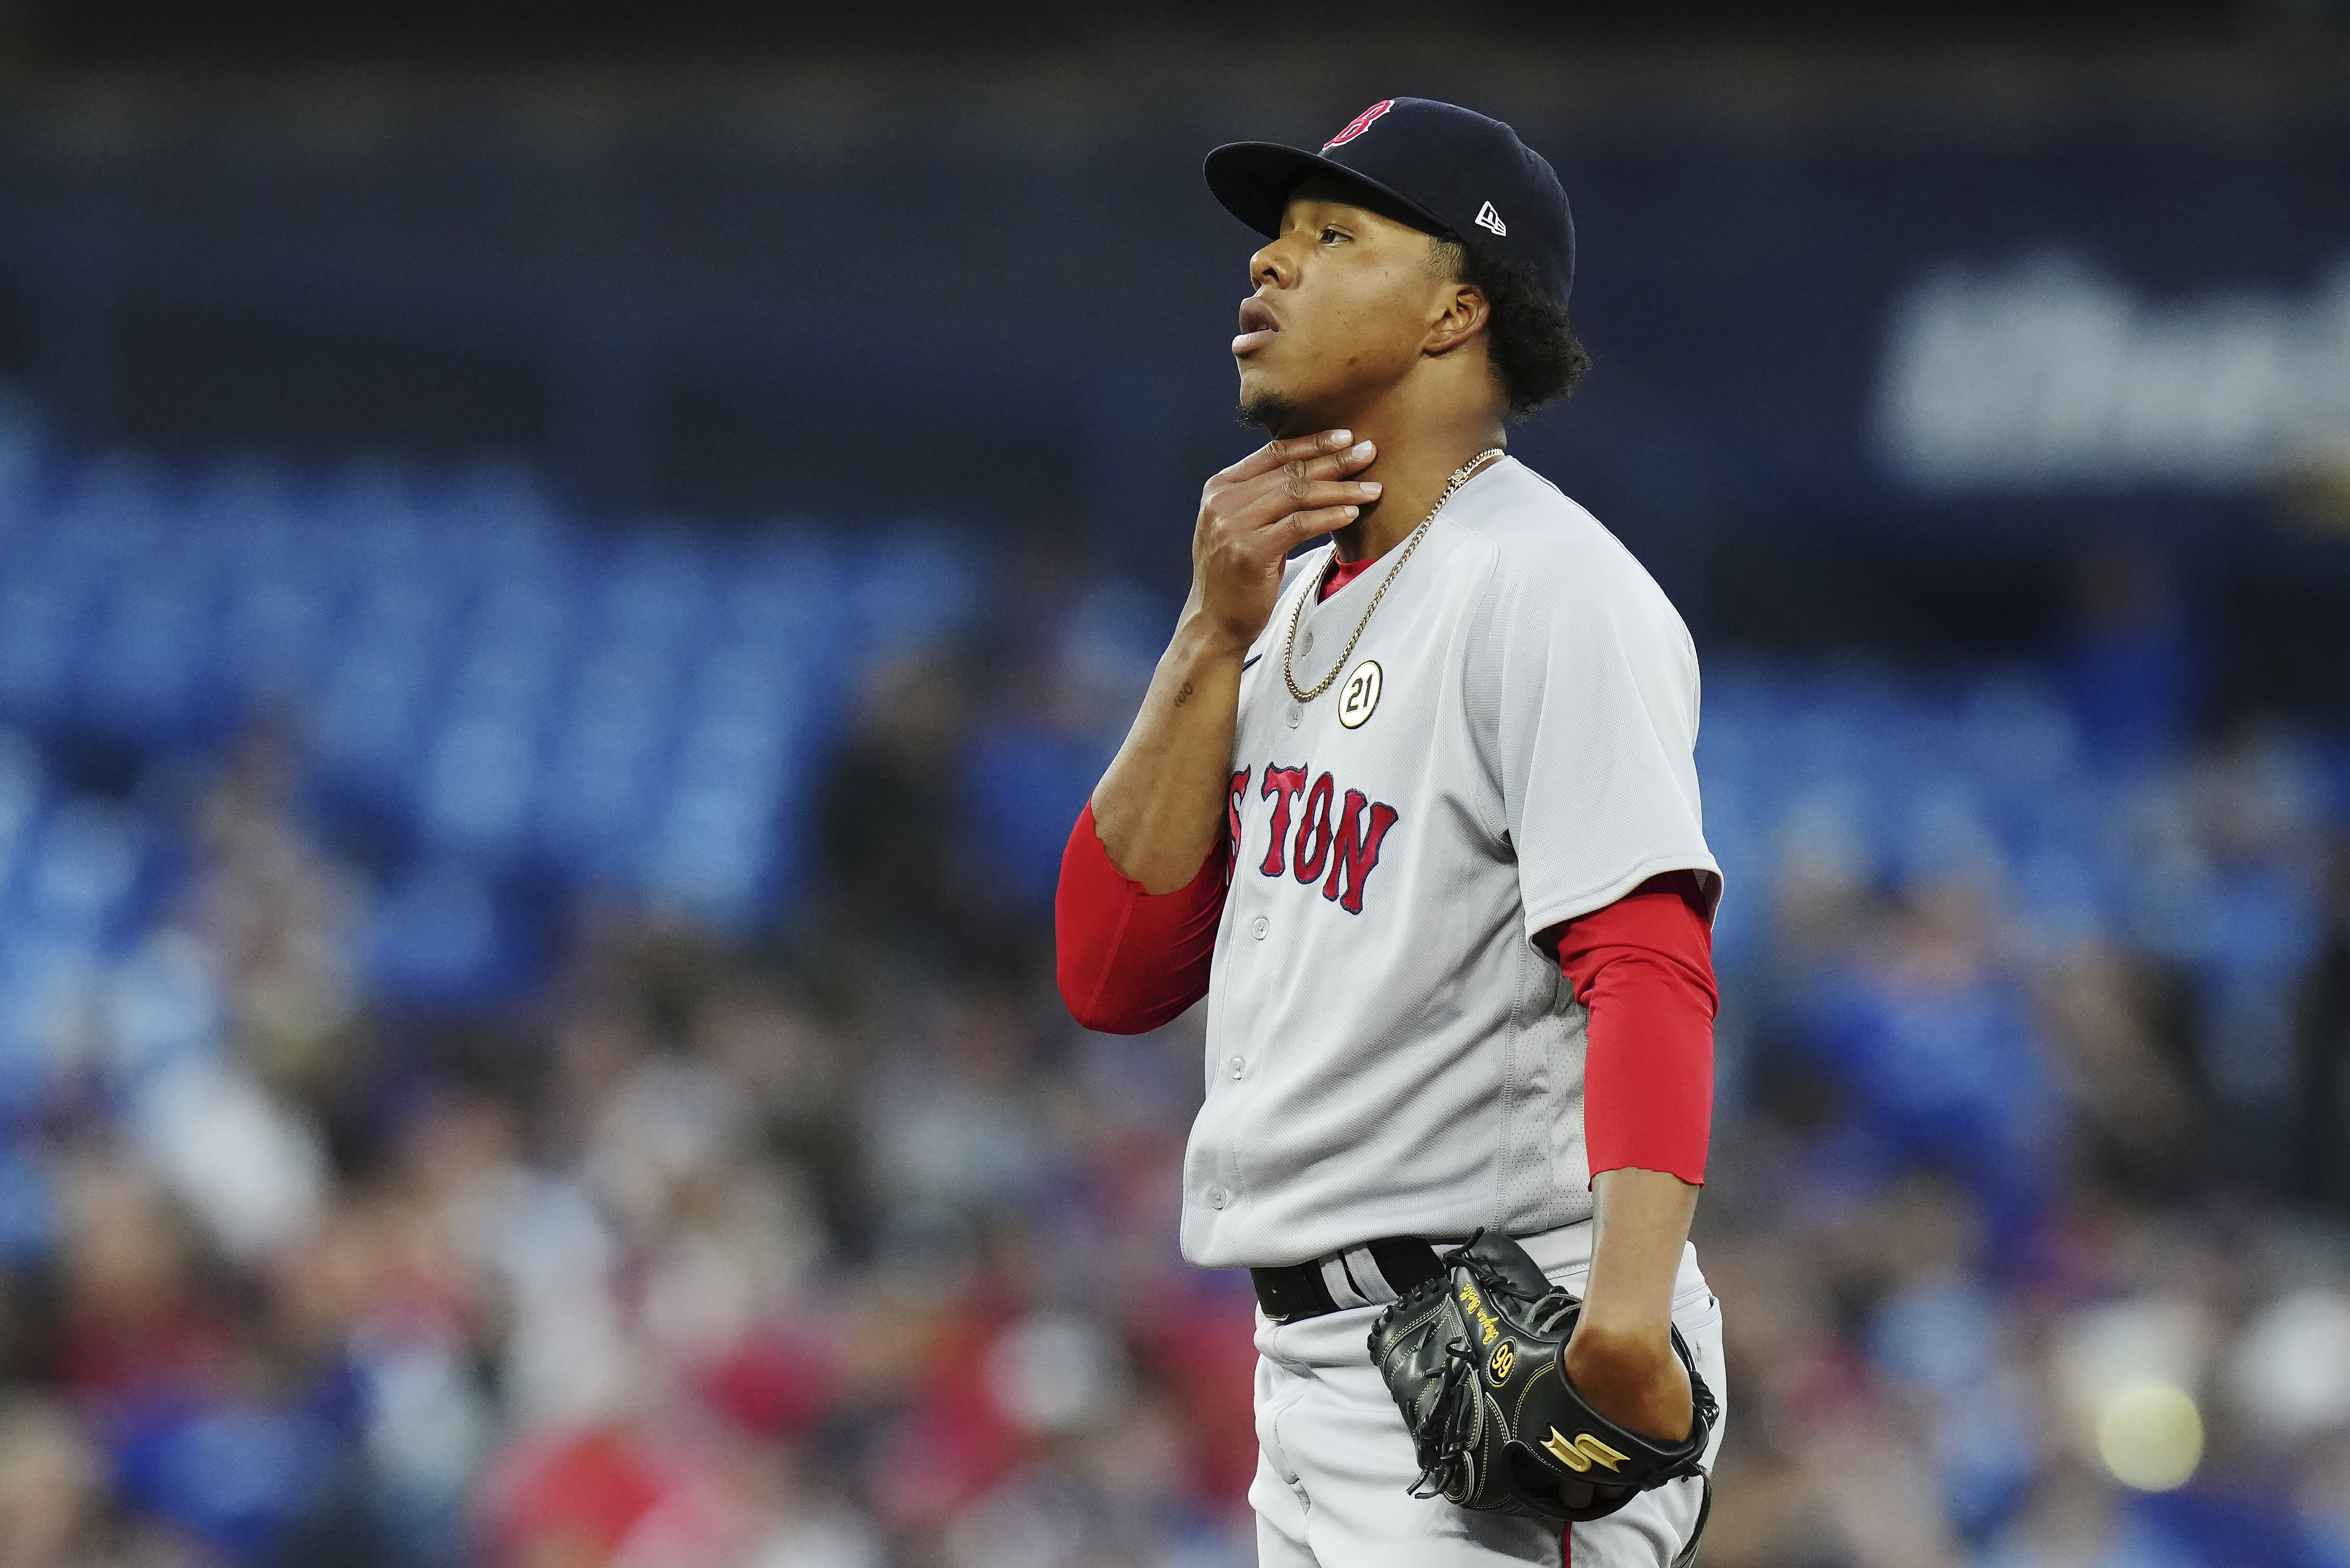 Bad day for Alex Cora and Red Sox only gets worse with loss to Blue Jays